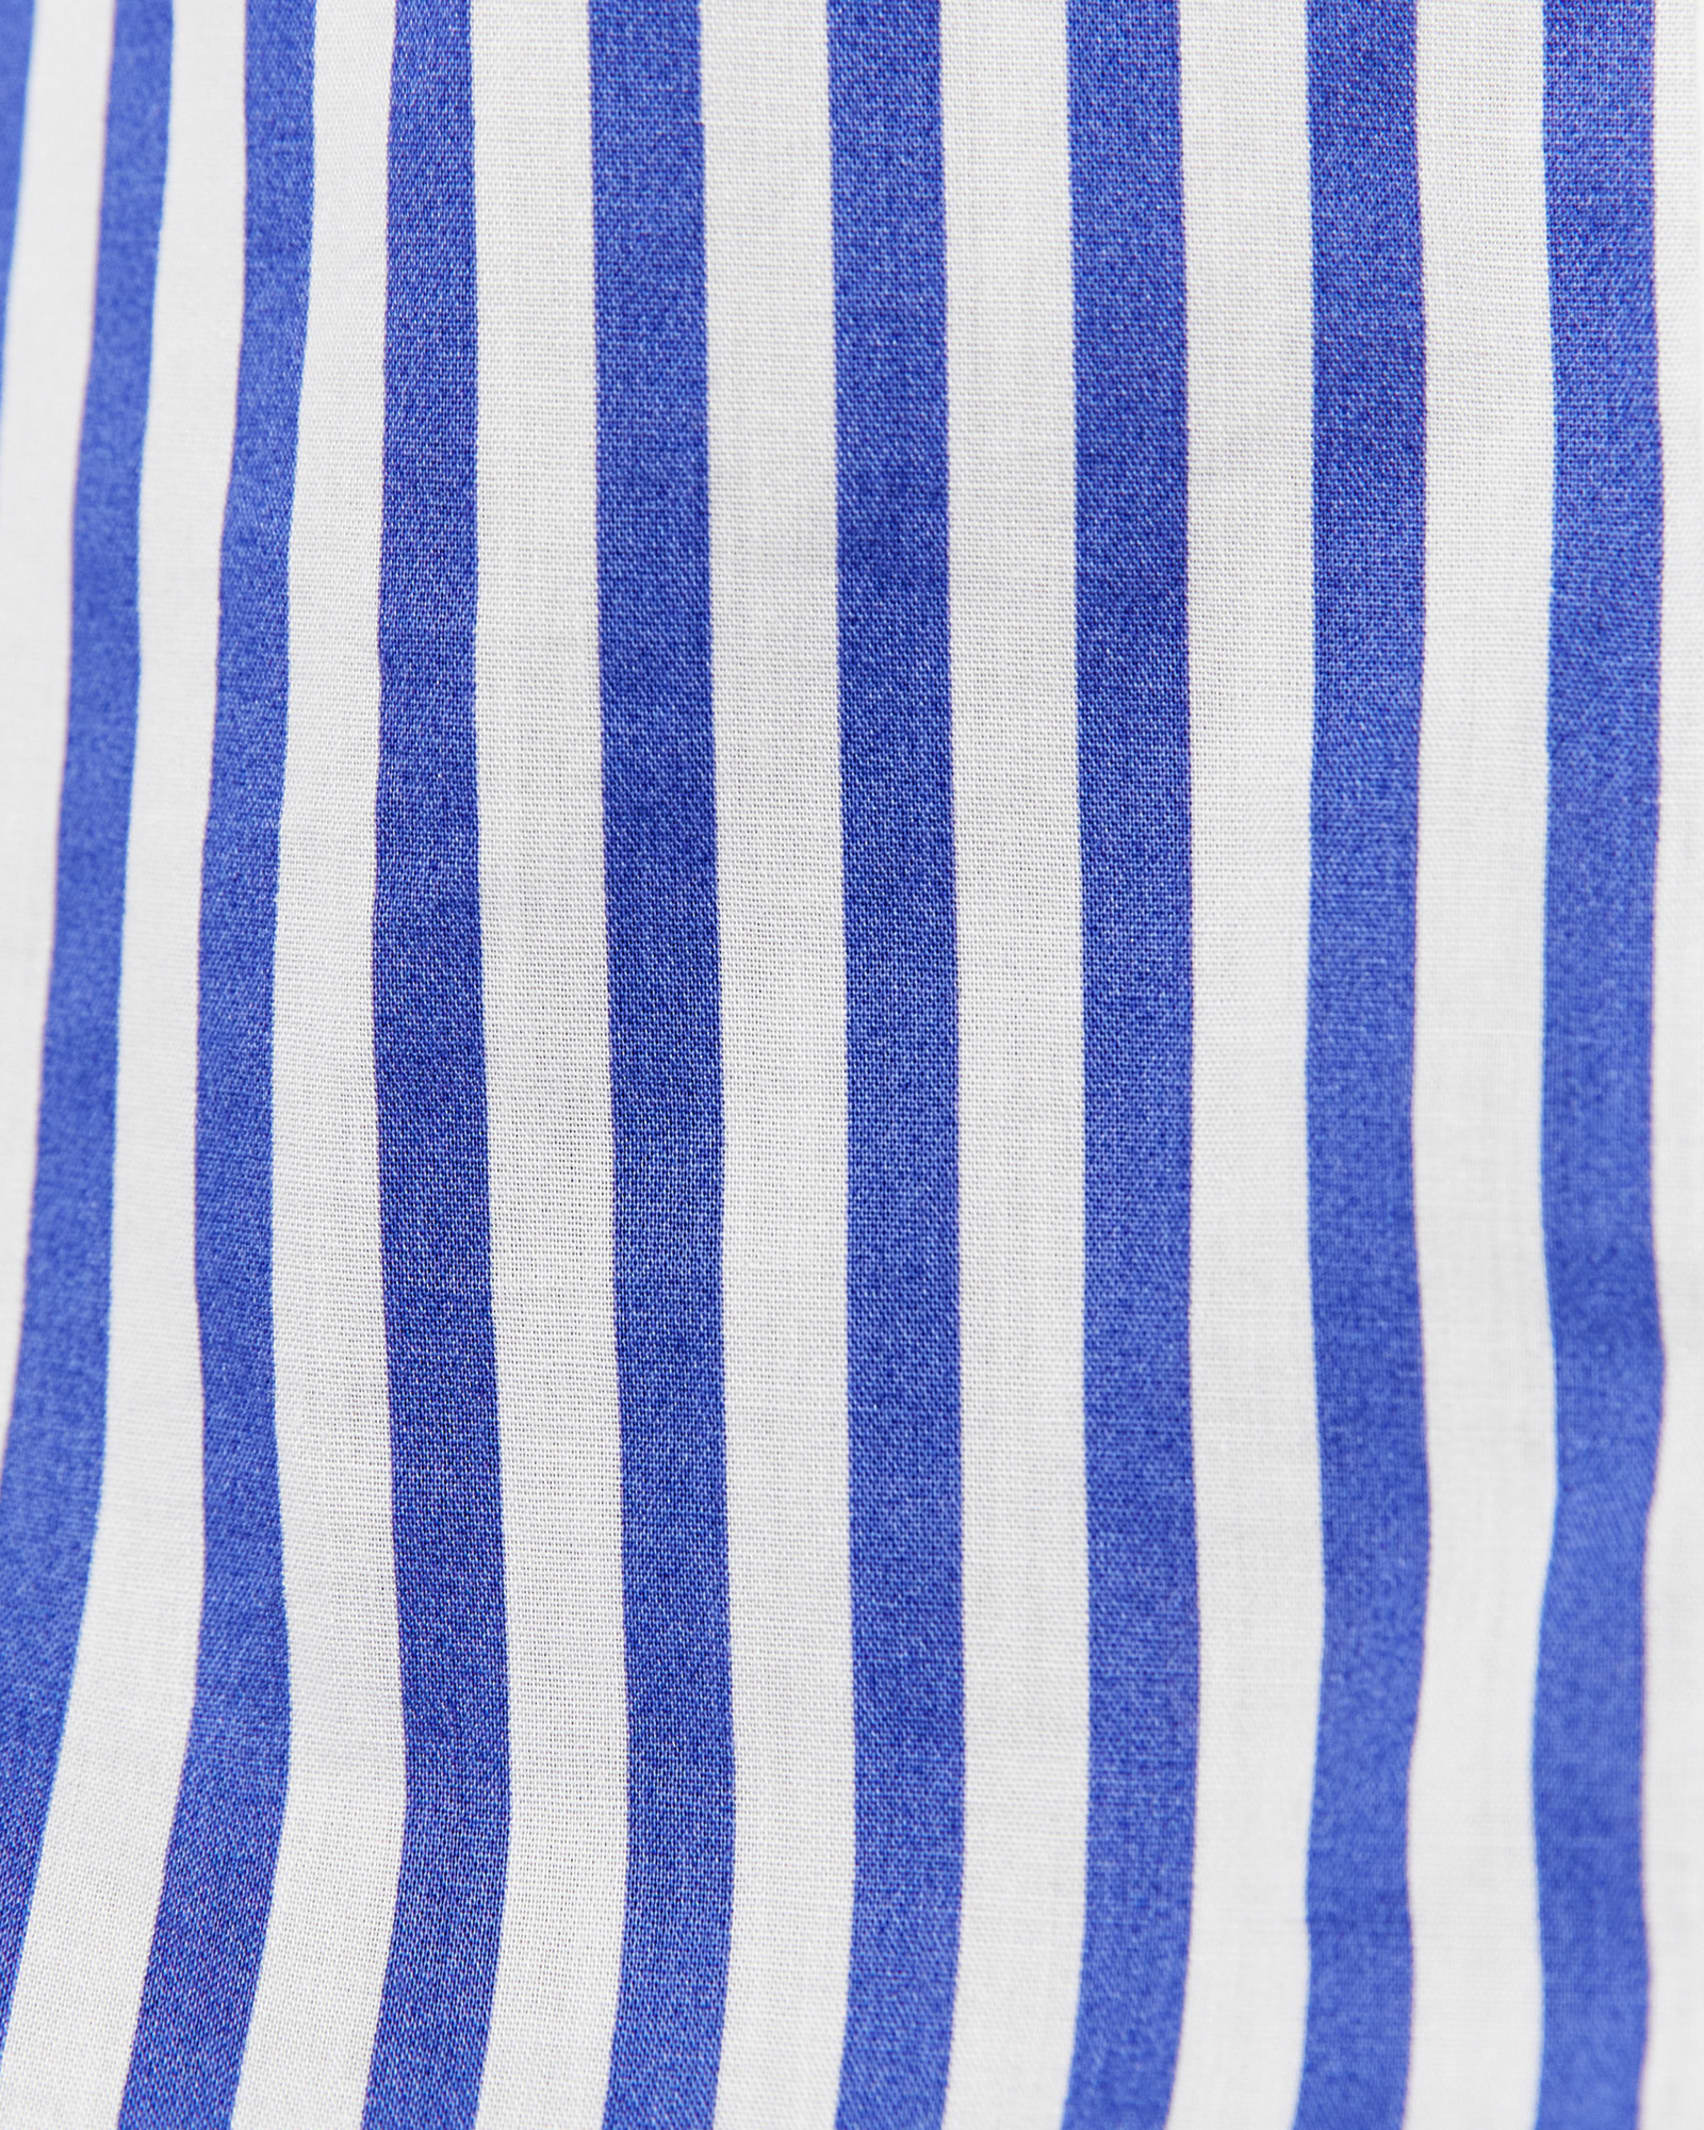 Stripe Lily Voile Shirt in BLUE/WHITE